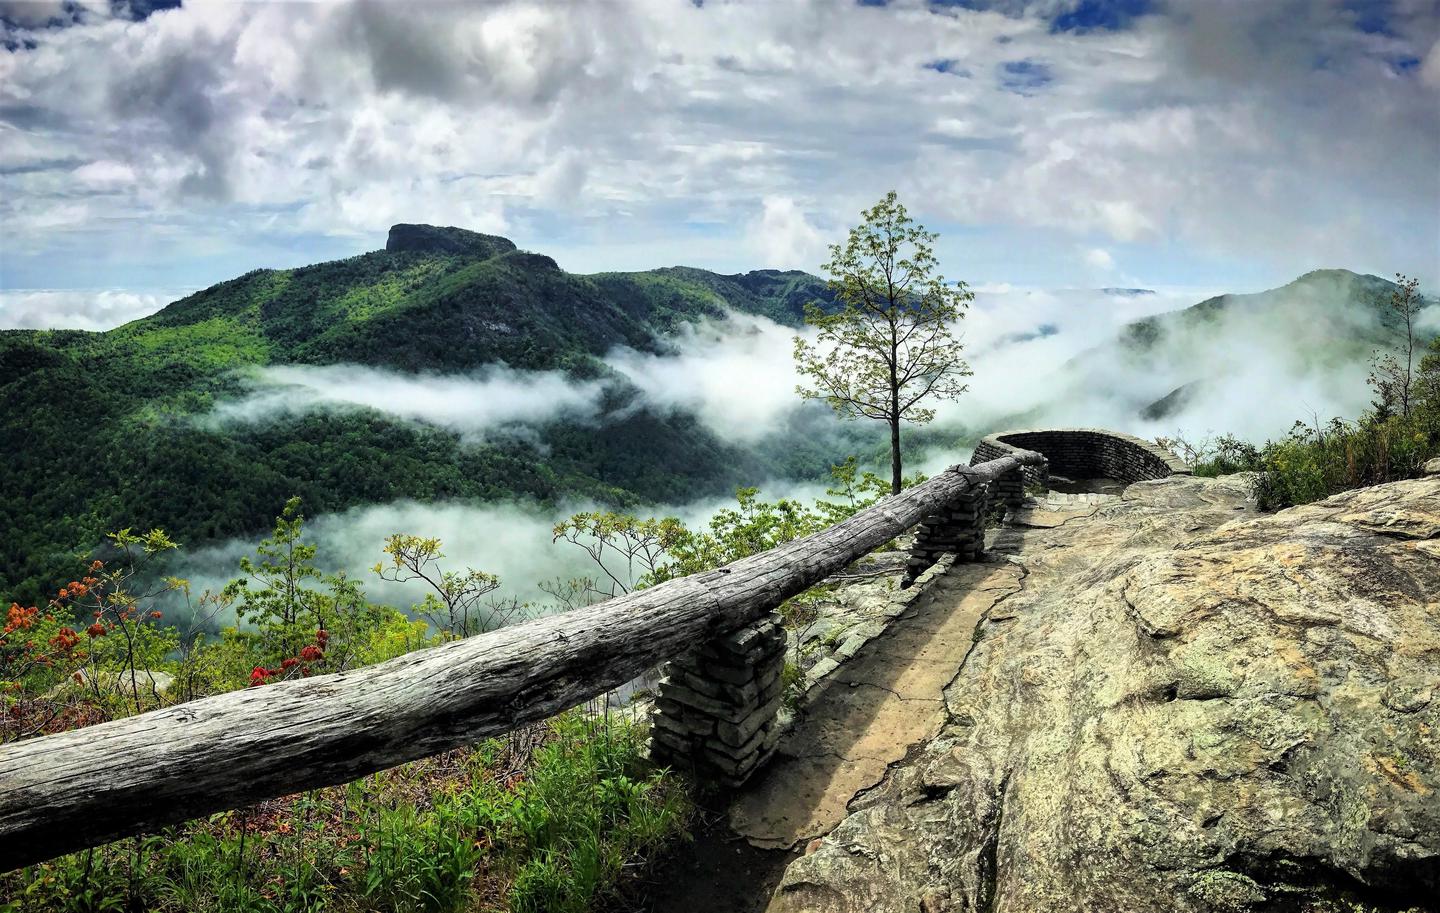 Rock surface with hand railing out to a cloudy mountain view. Scenic view of Table Rock Mountain looking south into the Linville Gorge from Wisemen's View. 